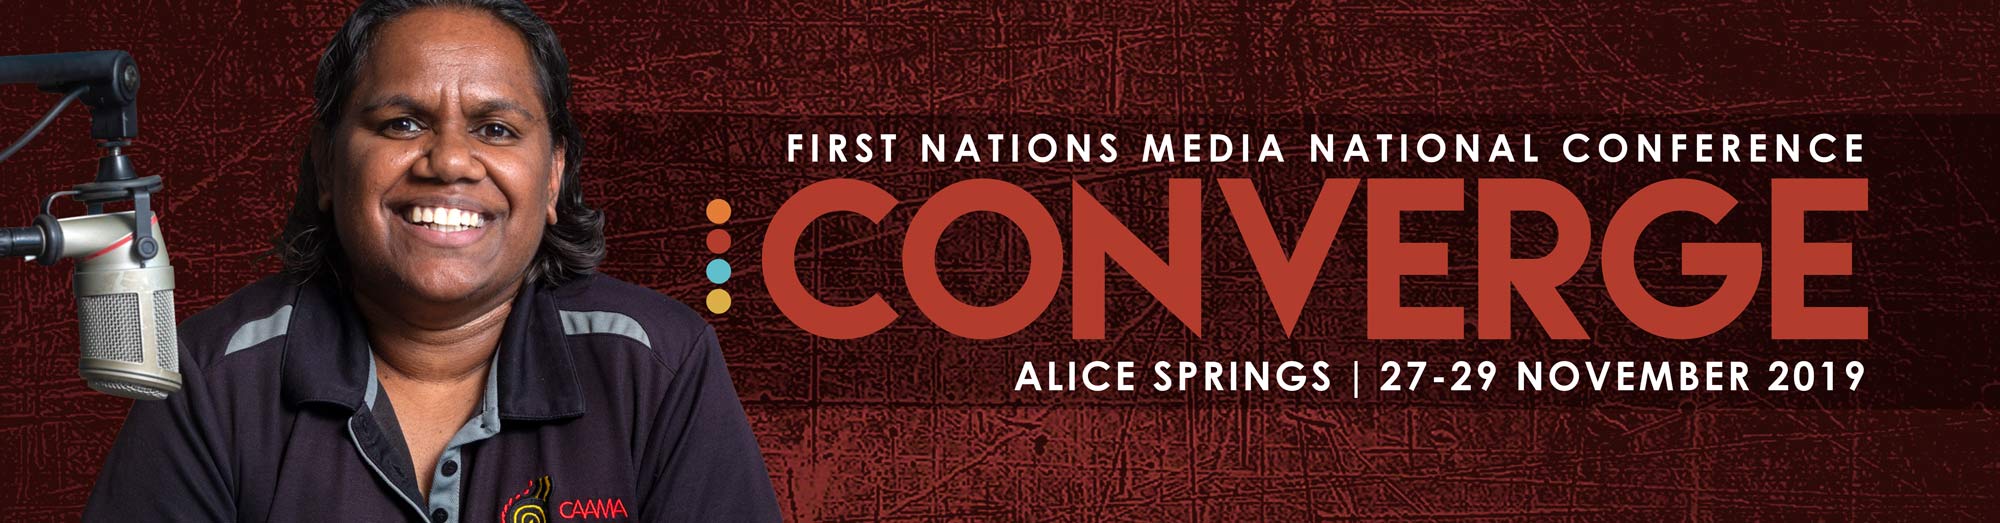 First Nations Media Converge Banner